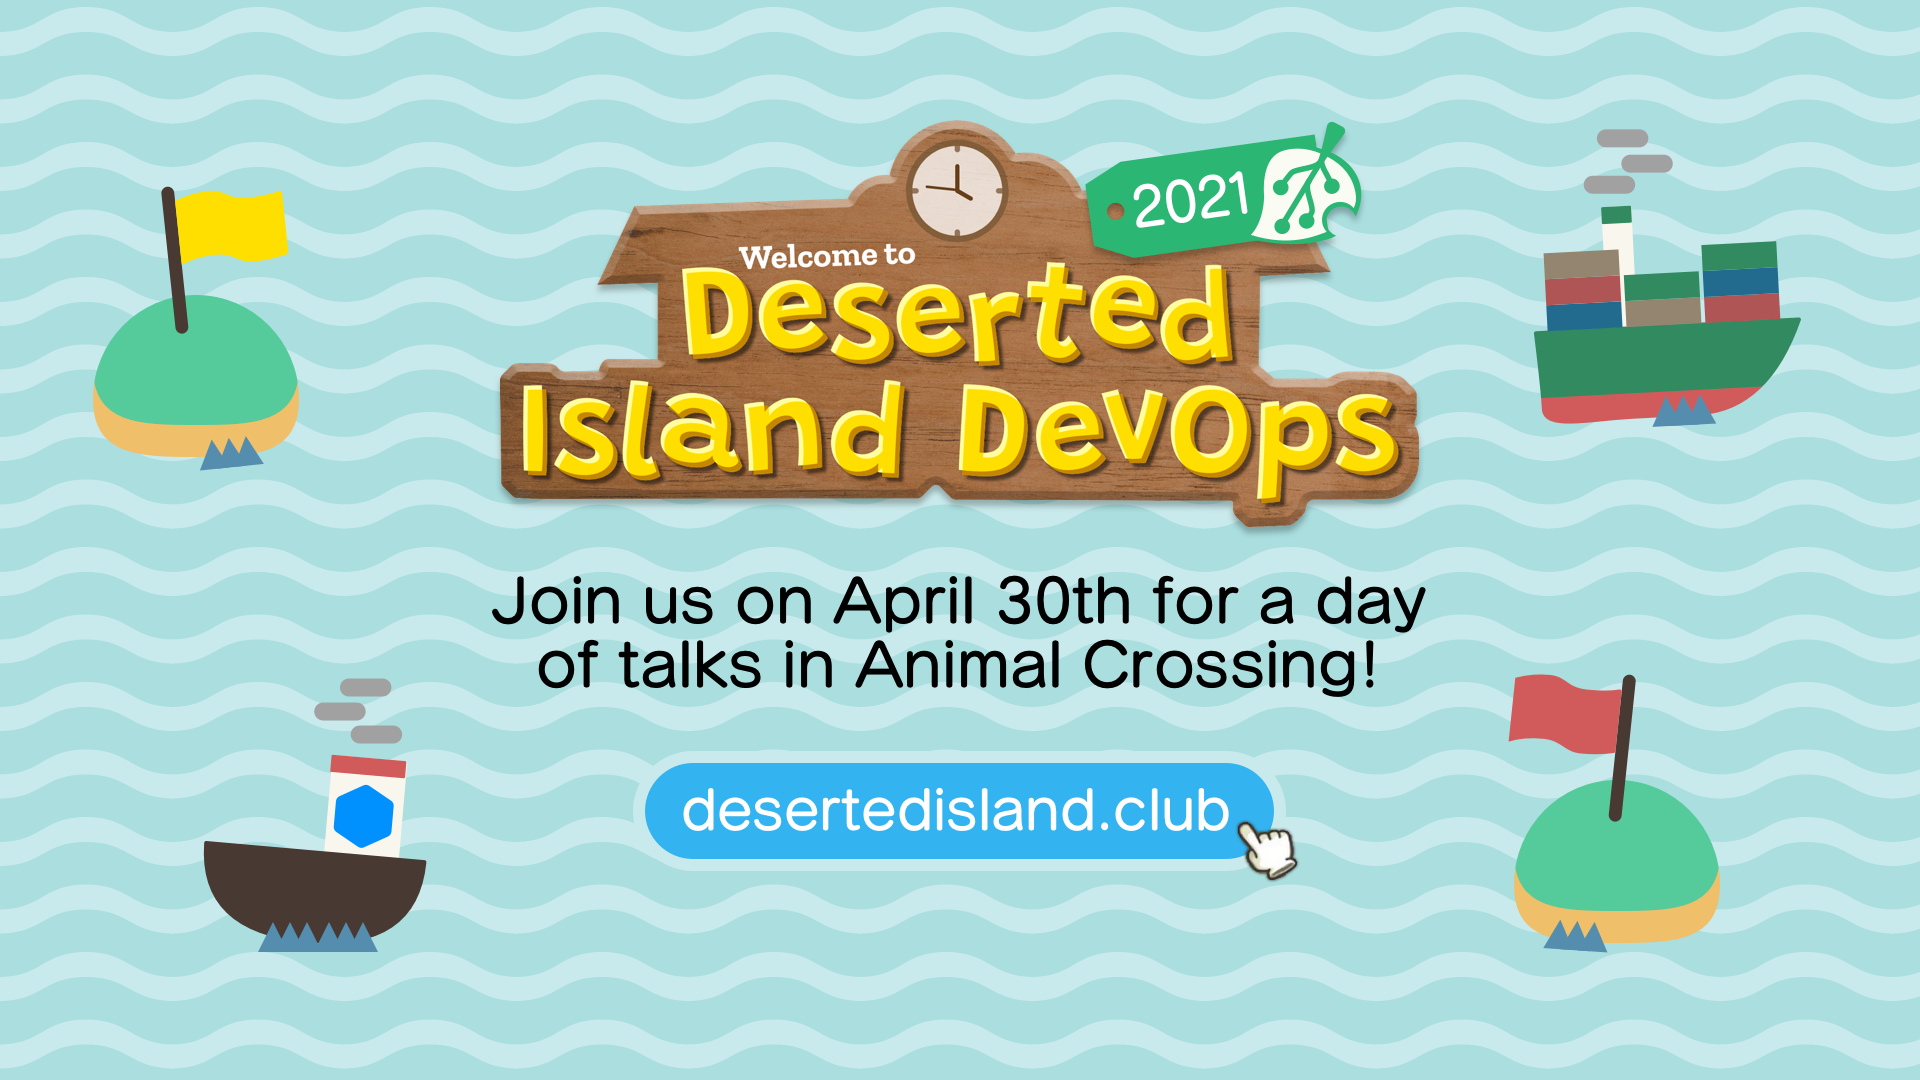 Join us April 30th for a day of DevOps Talks in Animal Crossing!